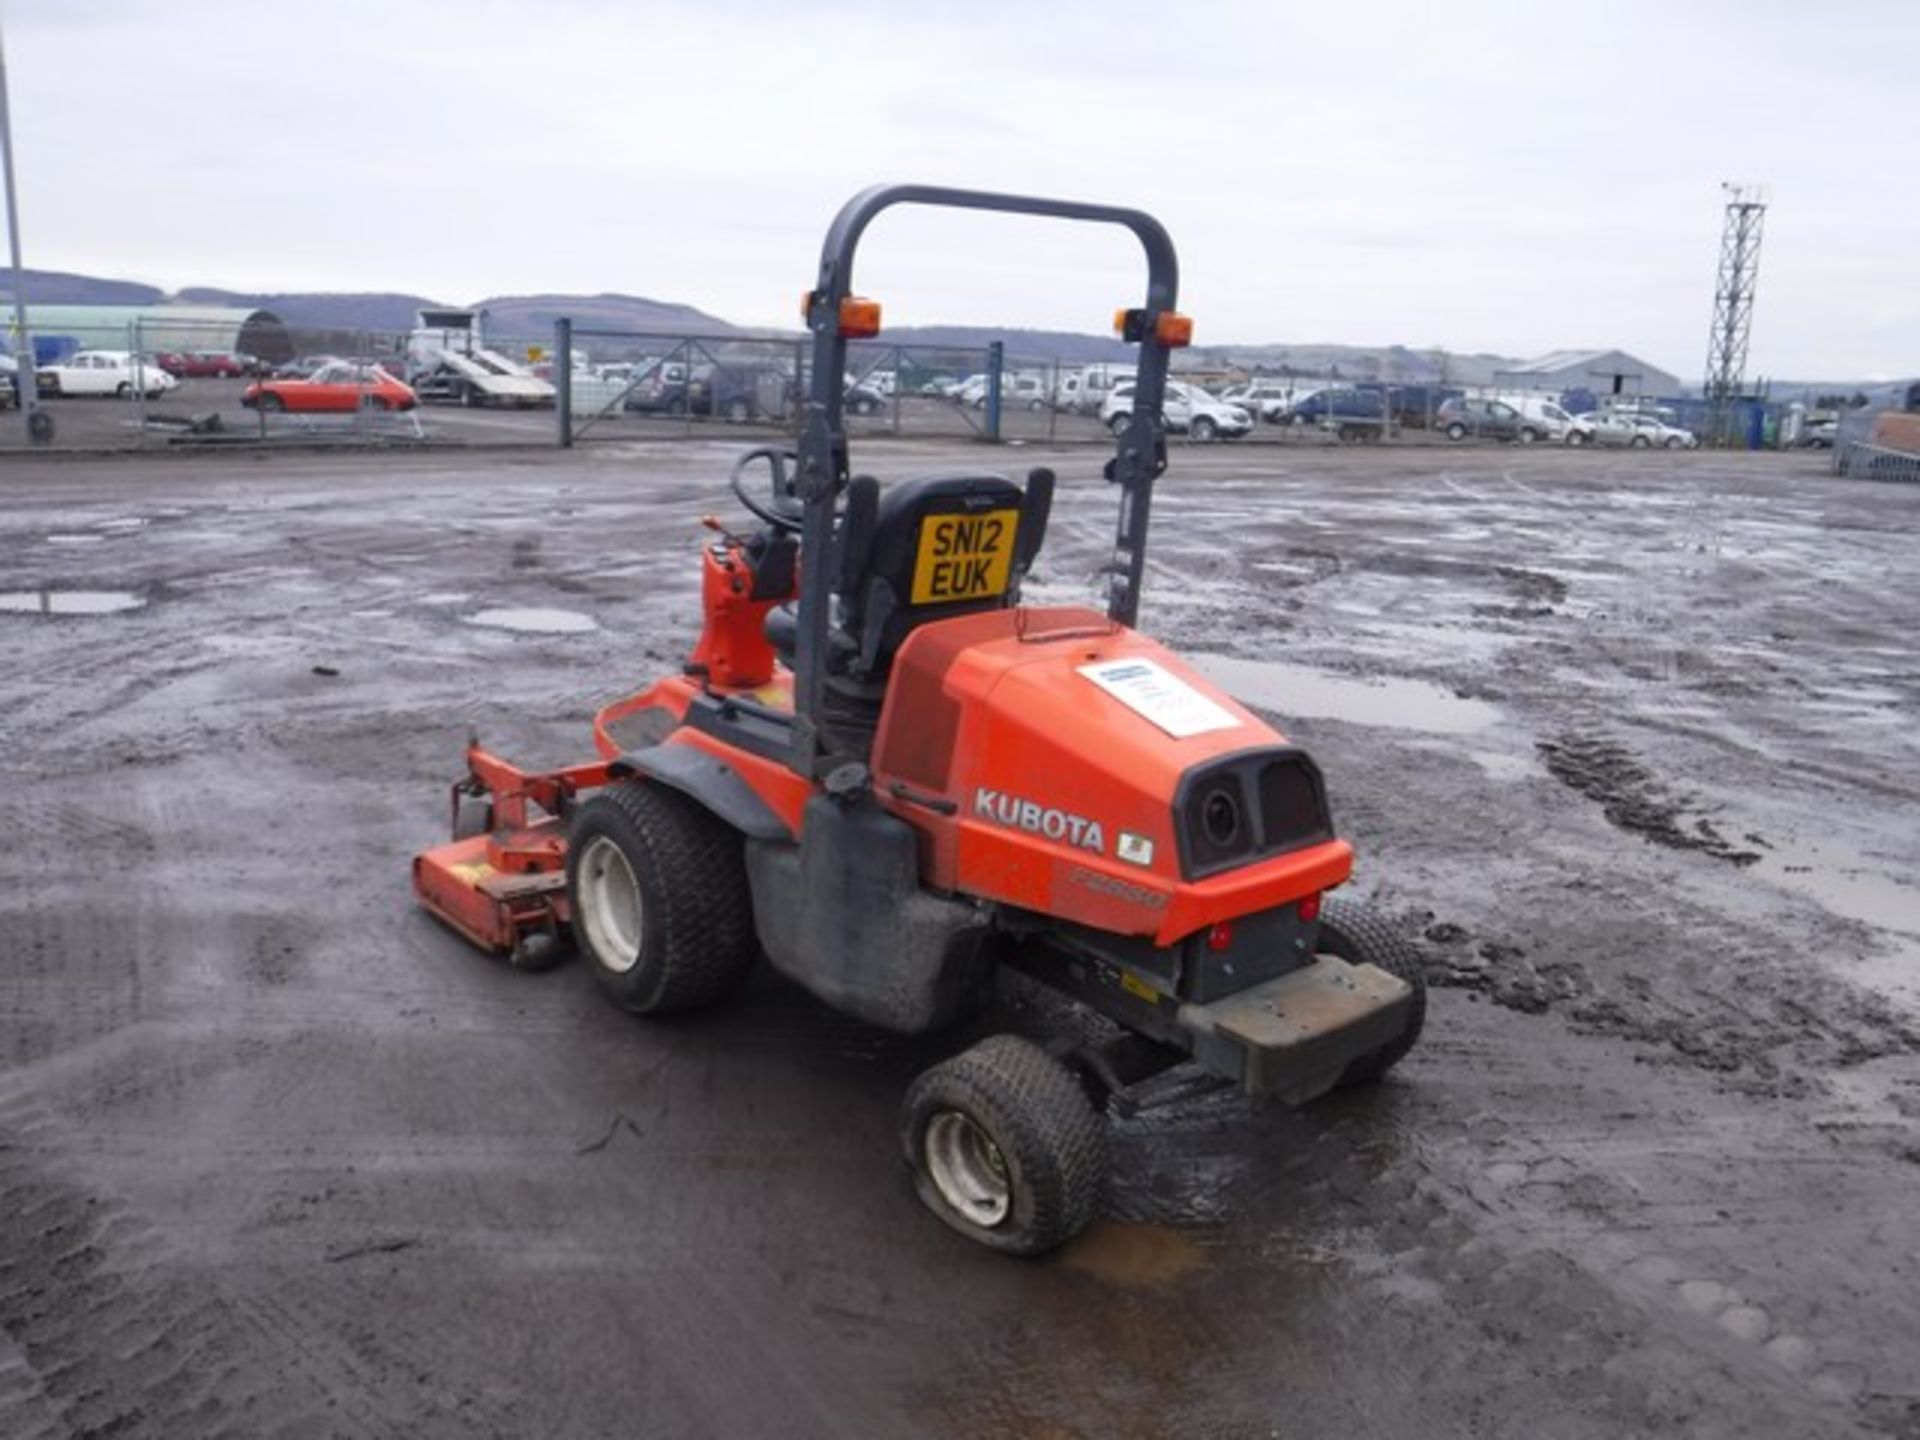 2012 KUBOTA F2880 MOWING MACHINE, REG - SN12EUK, S/N 31249, 824HRS (NOT VERIFIED) WITH FRONT MOUNTED - Image 10 of 14